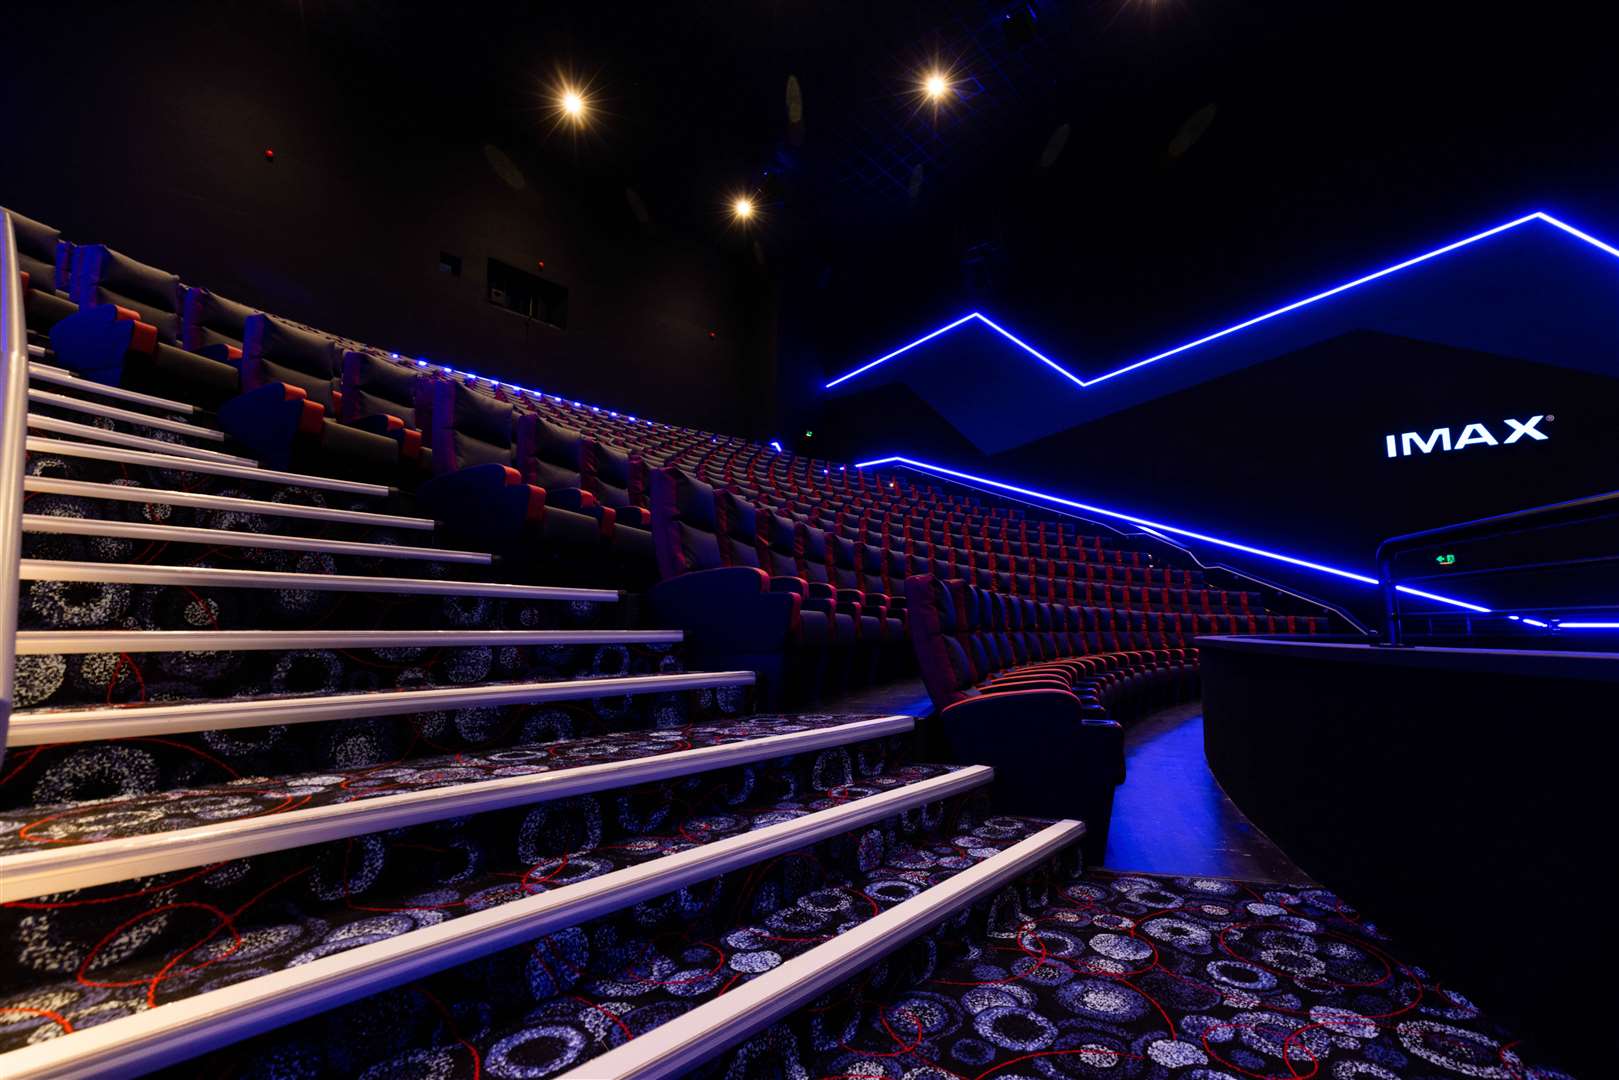 Morbius will be the first film shown in the newly built complex. Picture: Andrew Fosker / PinPep